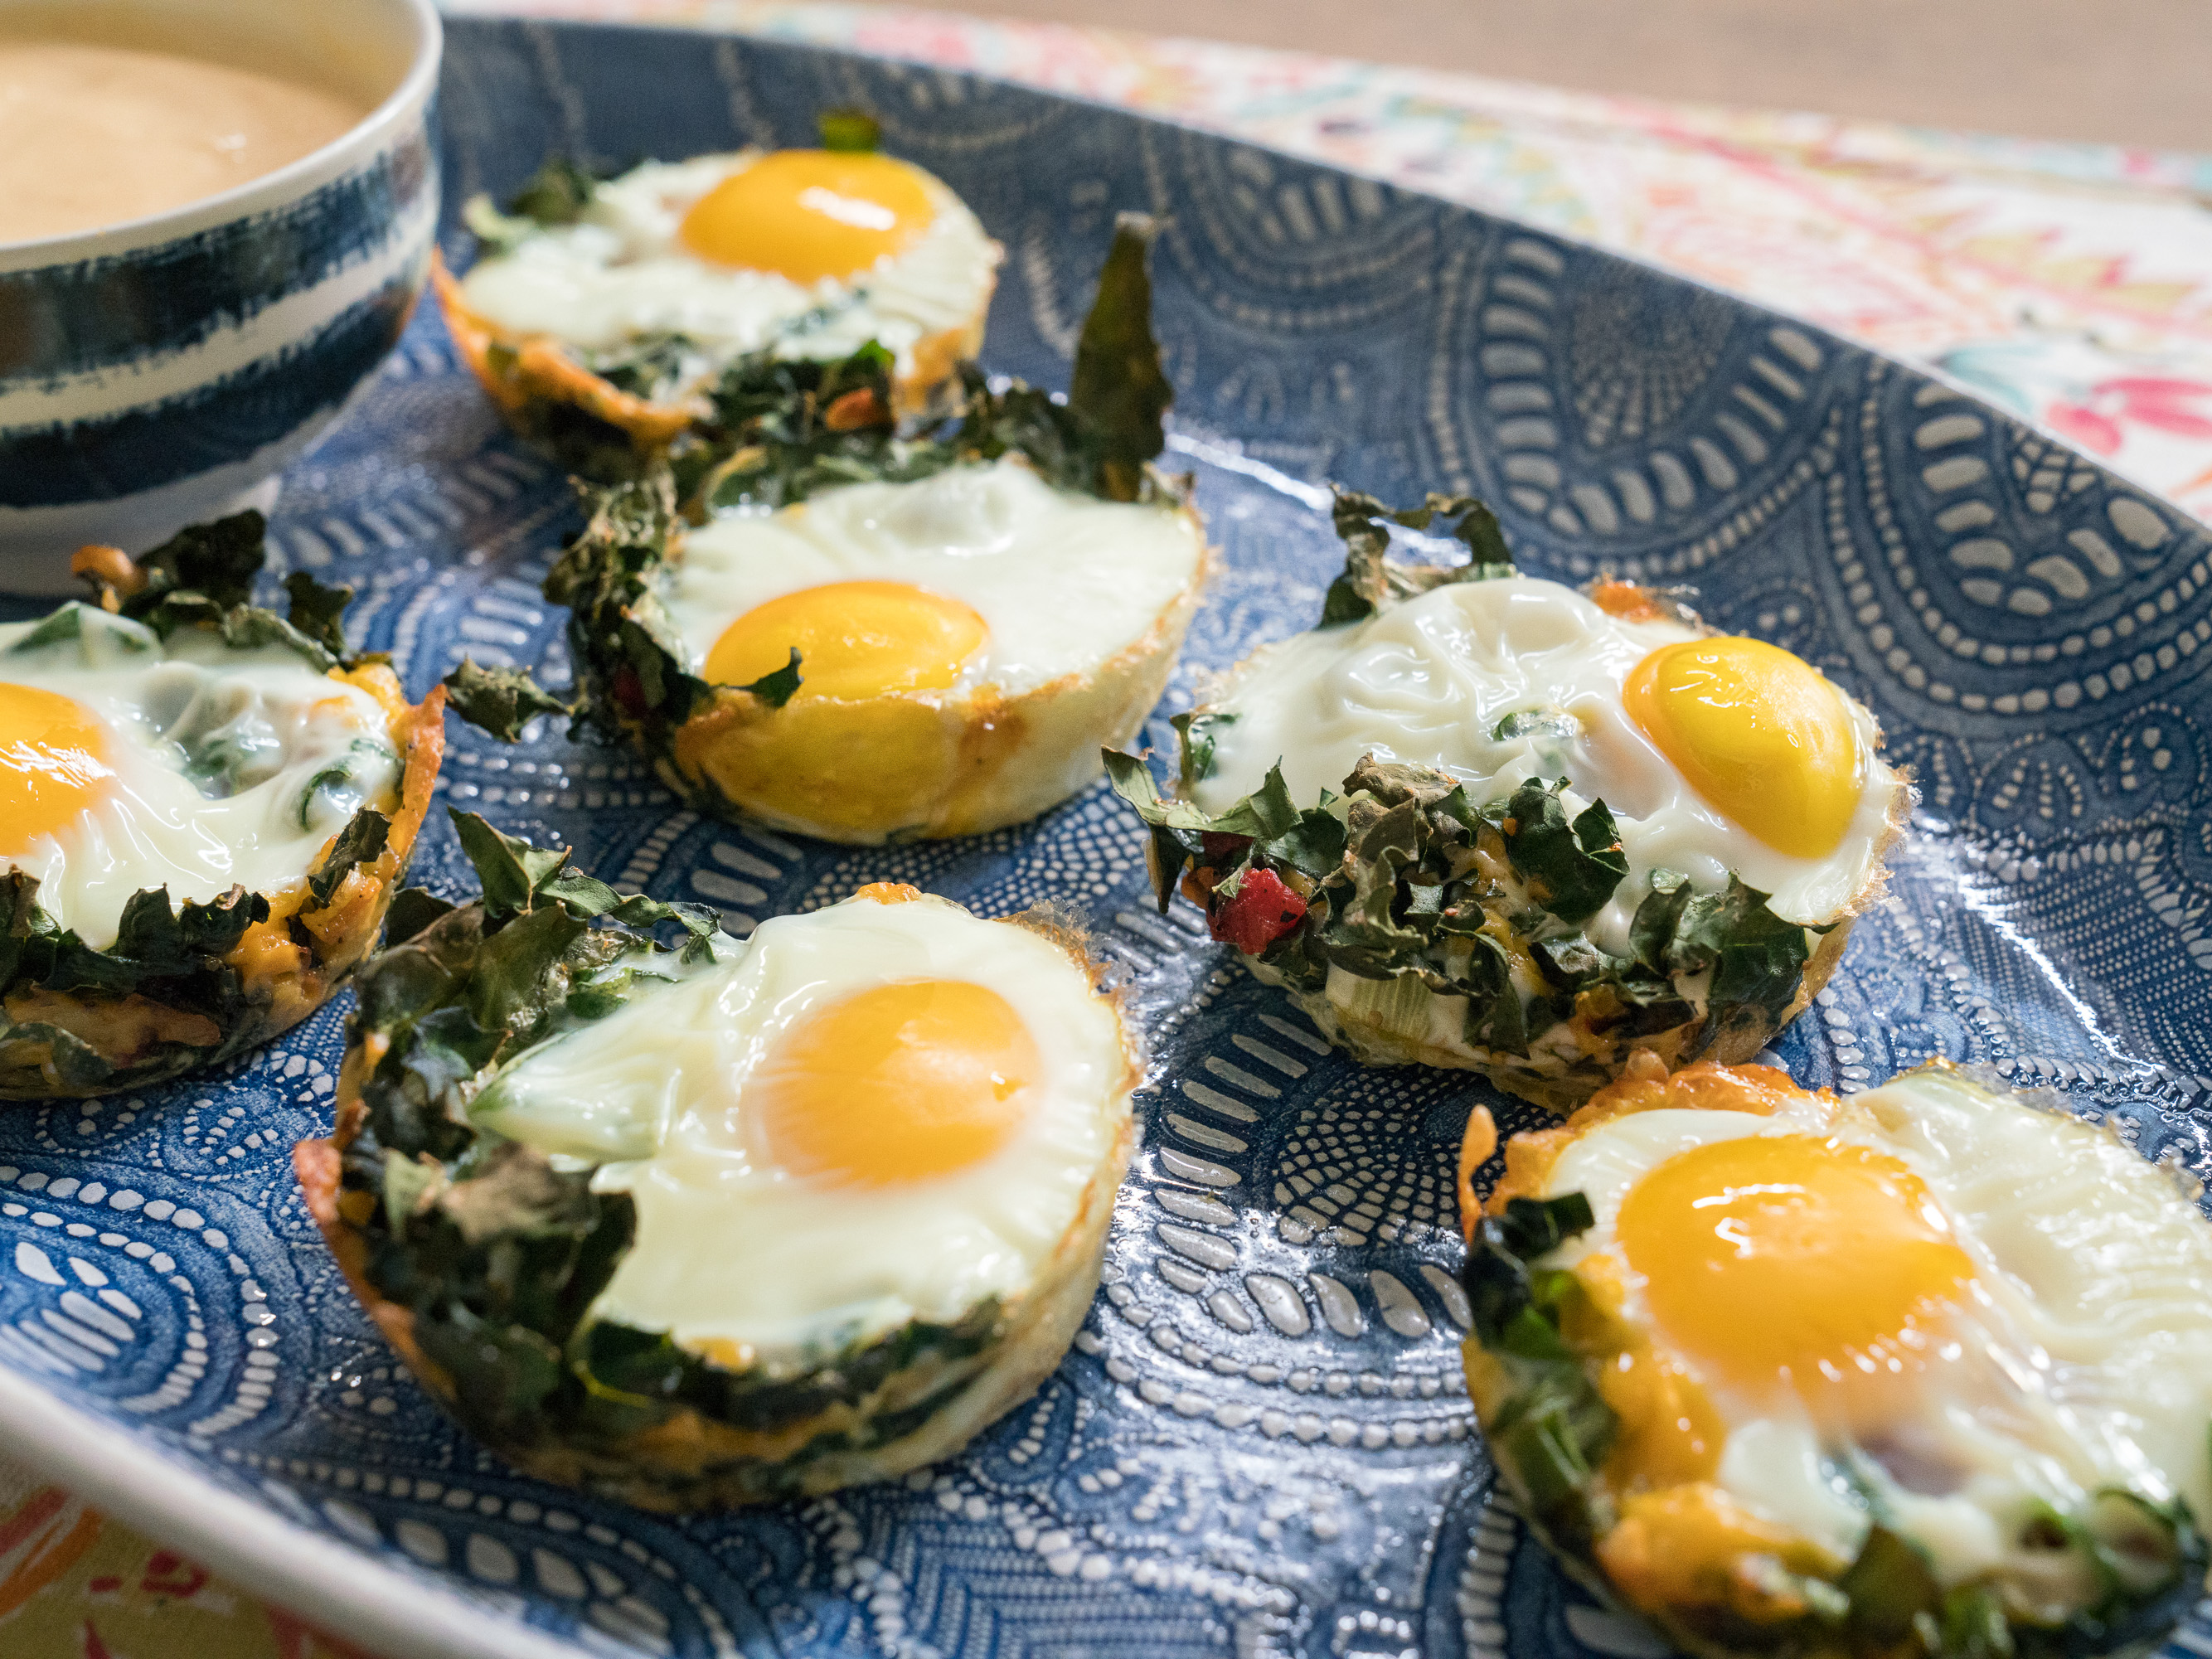 https://www.foodnetwork.com/content/dam/images/food/fullset/2018/11/28/0/YW1307_Muffin-Pan-Baked-Eggs-and-Veggies_s4x3.jpg